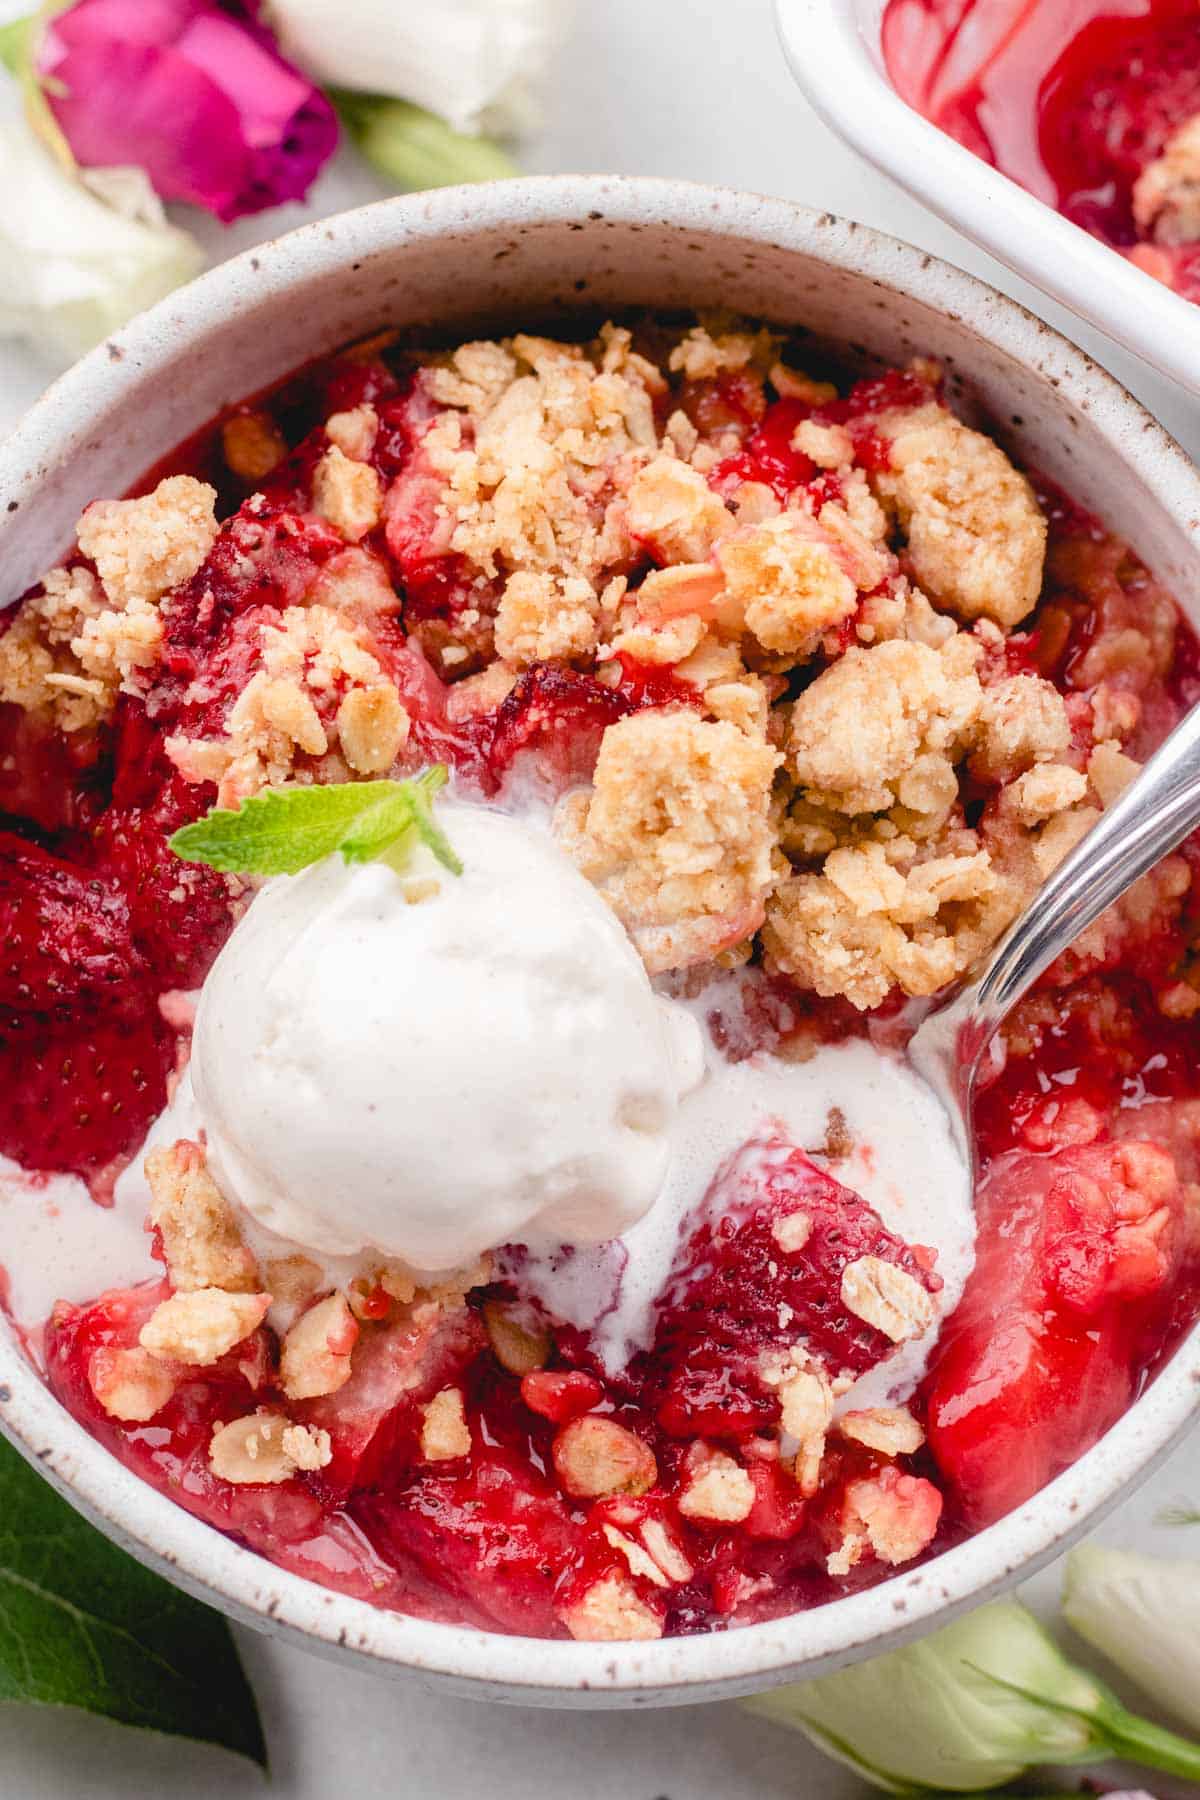 Scooping out strawberry crumble with a spoon, topped with ice cream and mint leaves.